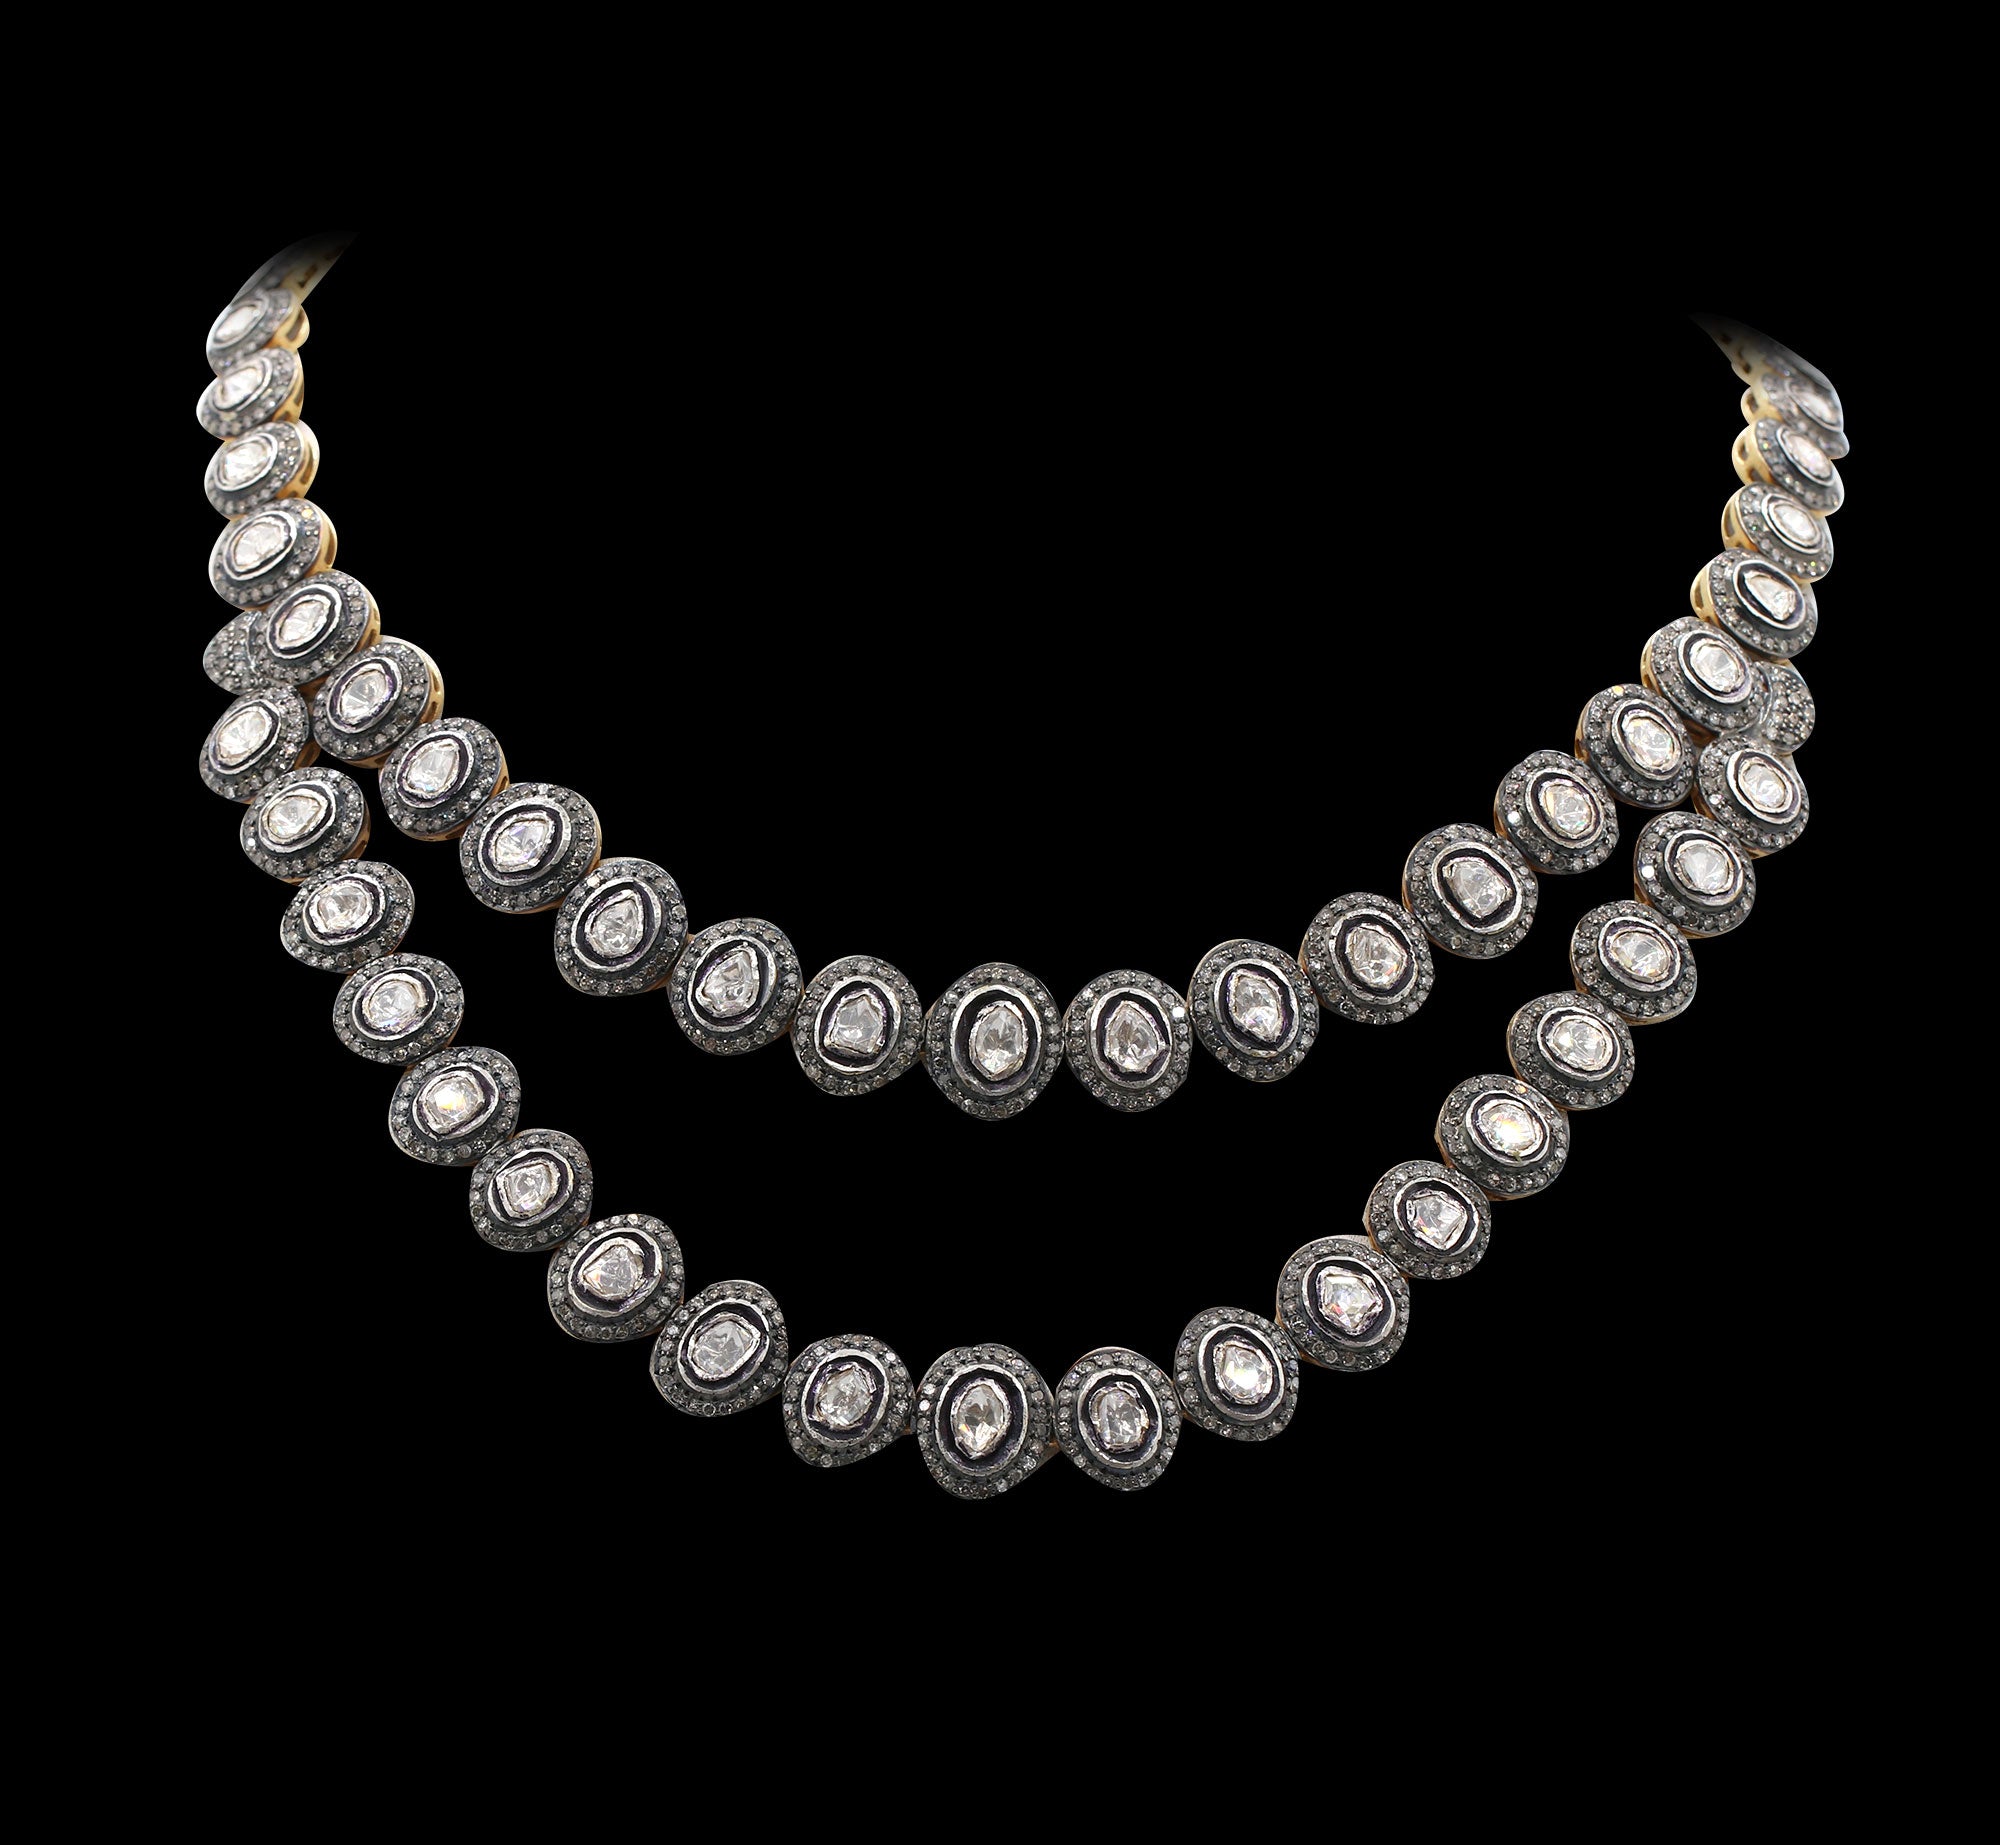 The Nightly Necklace: A Swedish Diamond Riviere